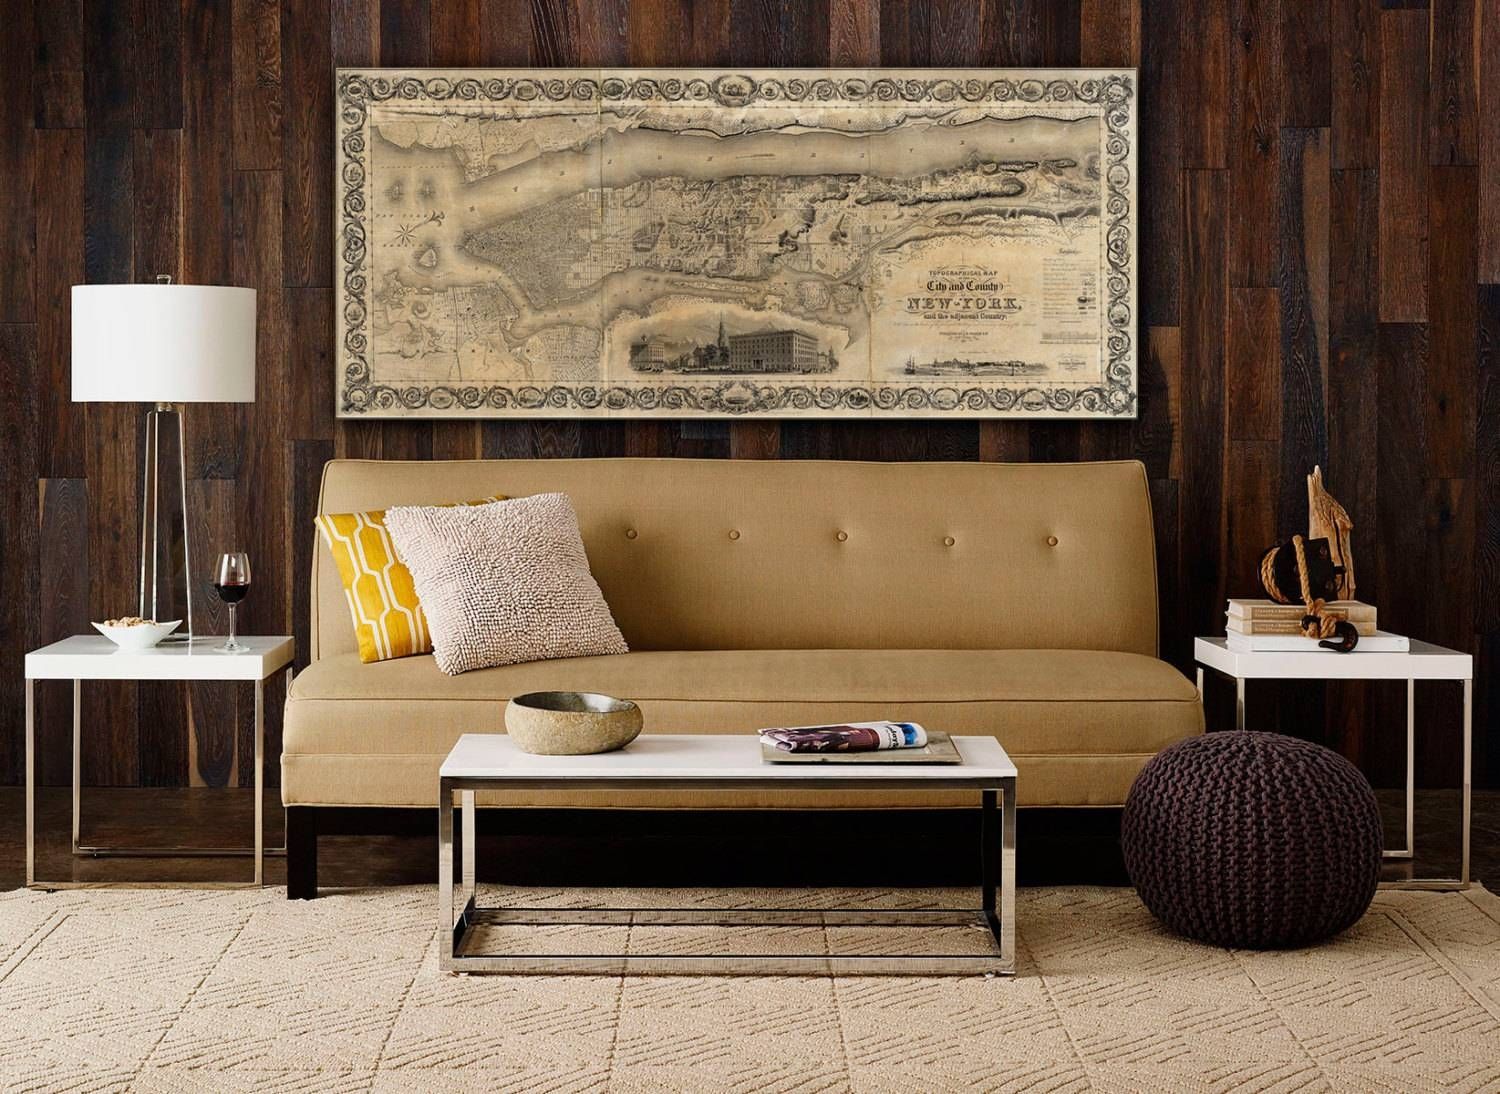 Giant Vintage New York City Map Old Antique Restoration In Newest Nyc Map Wall Art (View 14 of 20)